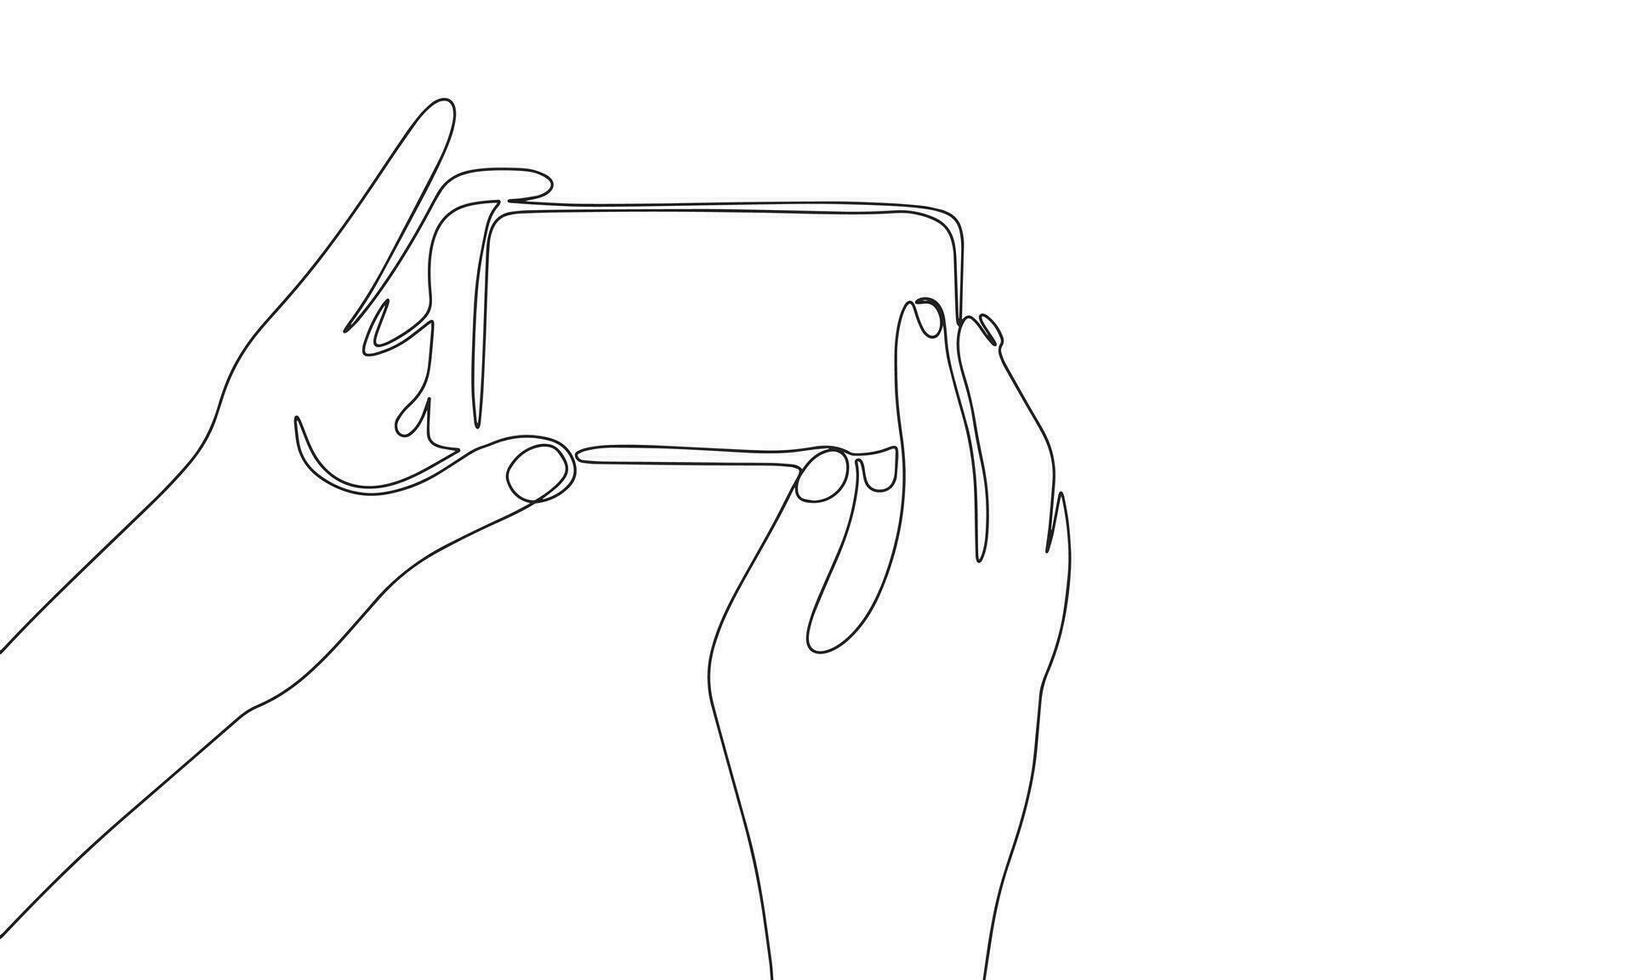 Abstract phone in hands in continuous line art drawing style. Minimalist black linear sketch isolated on white background. Vector illustration